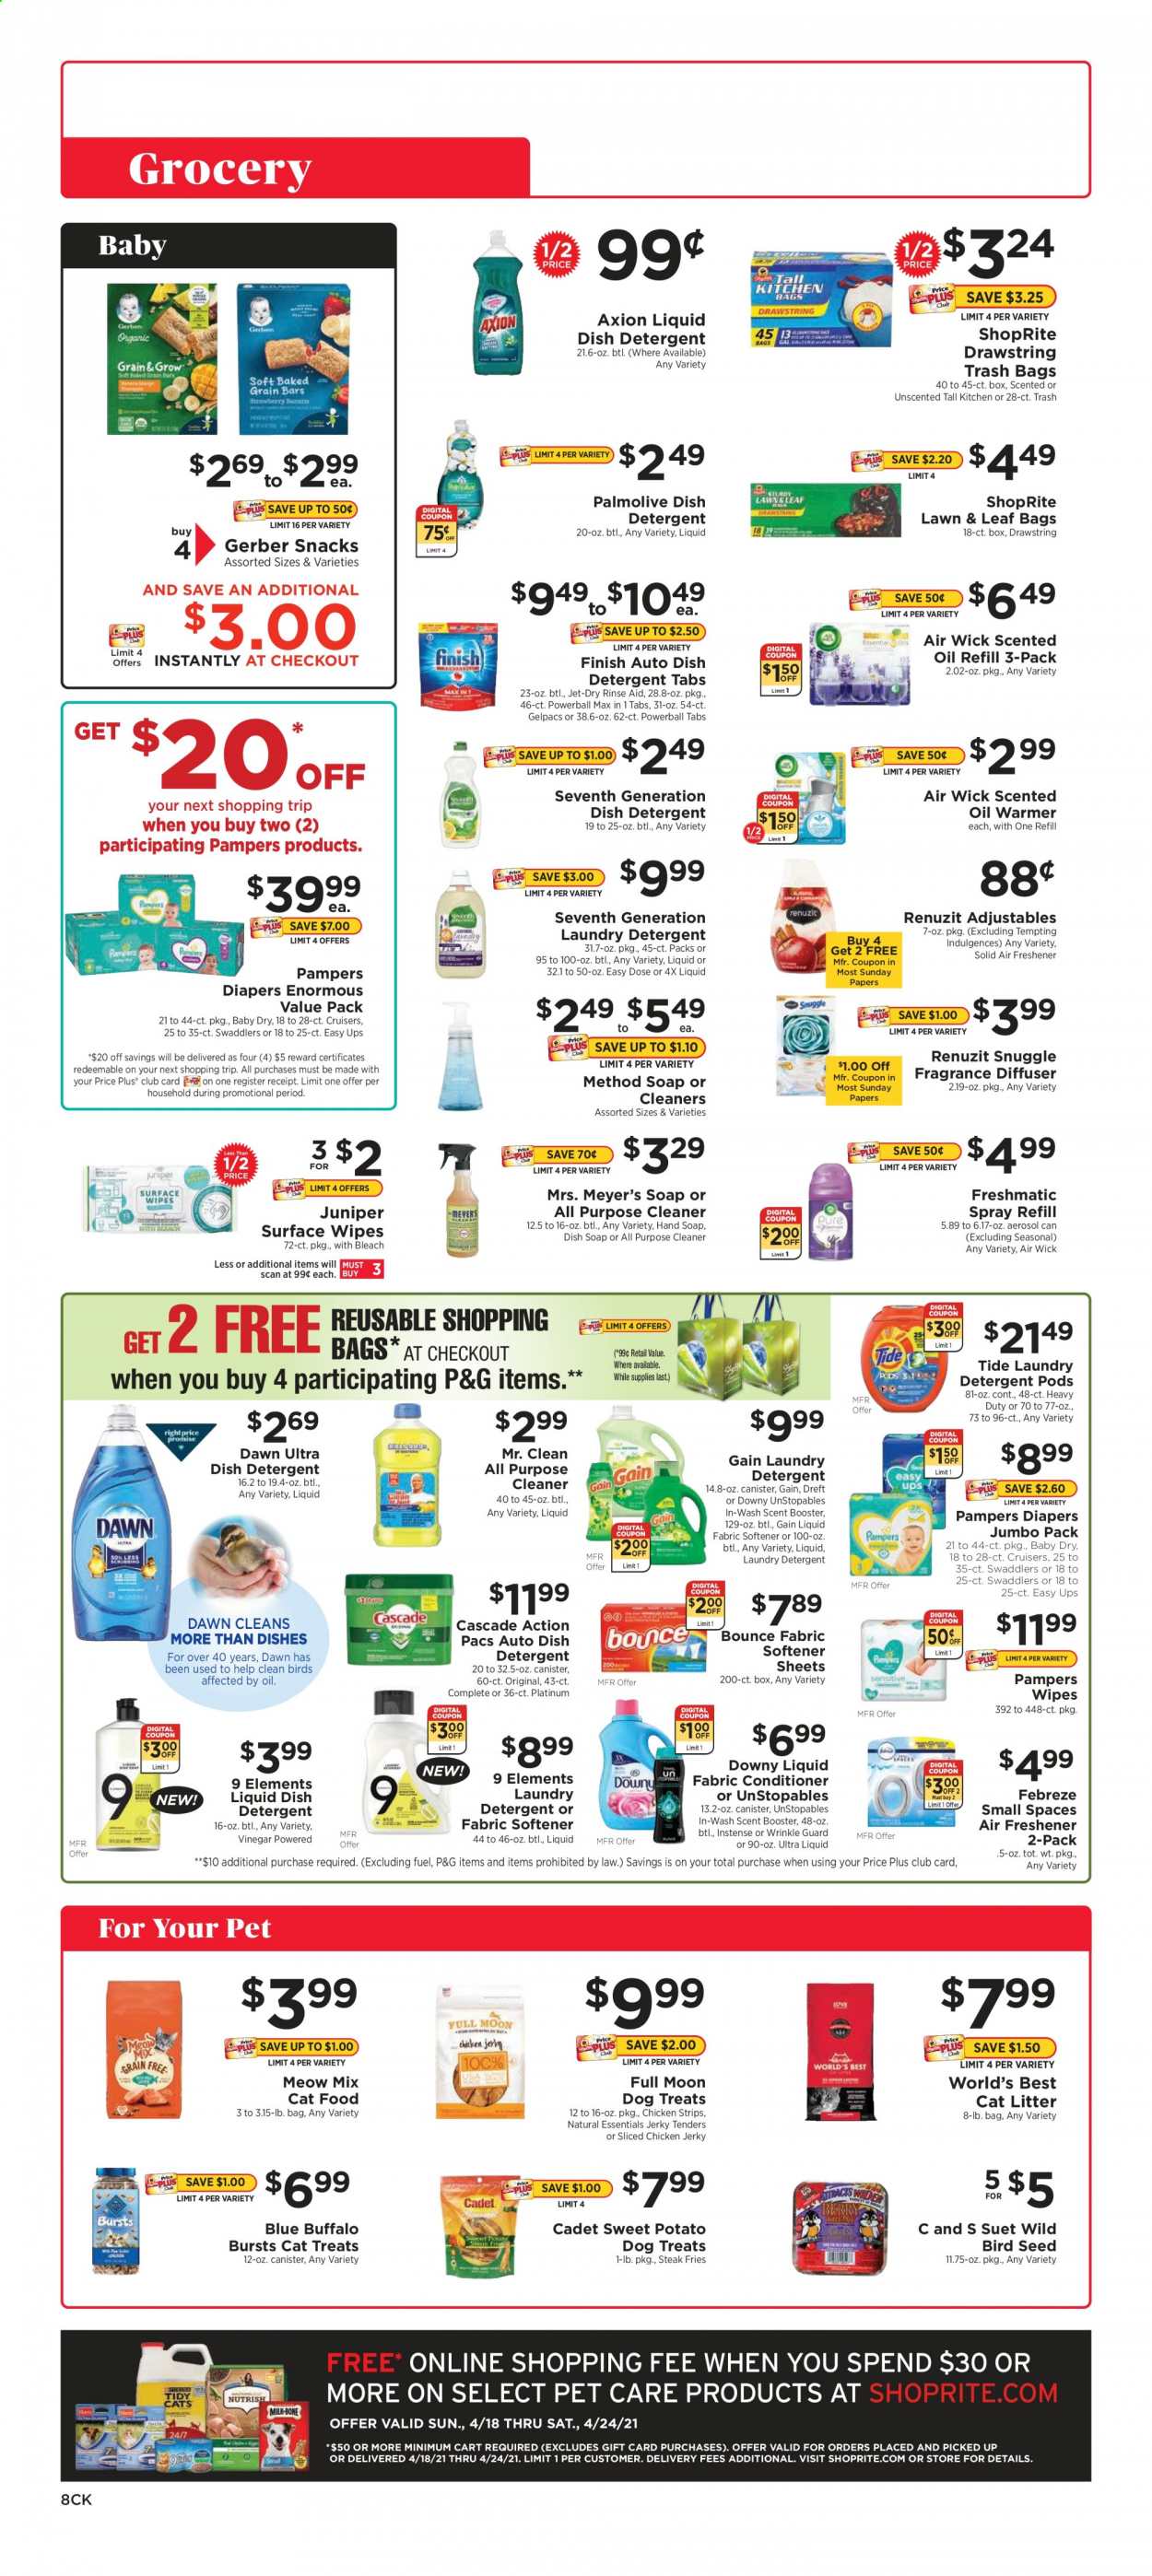 thumbnail - ShopRite Flyer - 04/18/2021 - 04/24/2021 - Sales products - sweet potato, jerky, suet, strips, chicken strips, potato fries, snack, Gerber, vinegar, oil, steak, Pampers, nappies, detergent, Febreze, Gain, wipes, cleaner, bleach, all purpose cleaner, Cascade, Snuggle, Tide, Unstopables, fabric softener, laundry detergent, Bounce, Downy Laundry, Jet, hand soap, Palmolive, soap, conditioner, fragrance, trash bags, Renuzit, air freshener, Air Wick, scented oil, cat litter, animal food, bird food, cat food, Meow Mix, plant seeds. Page 8.